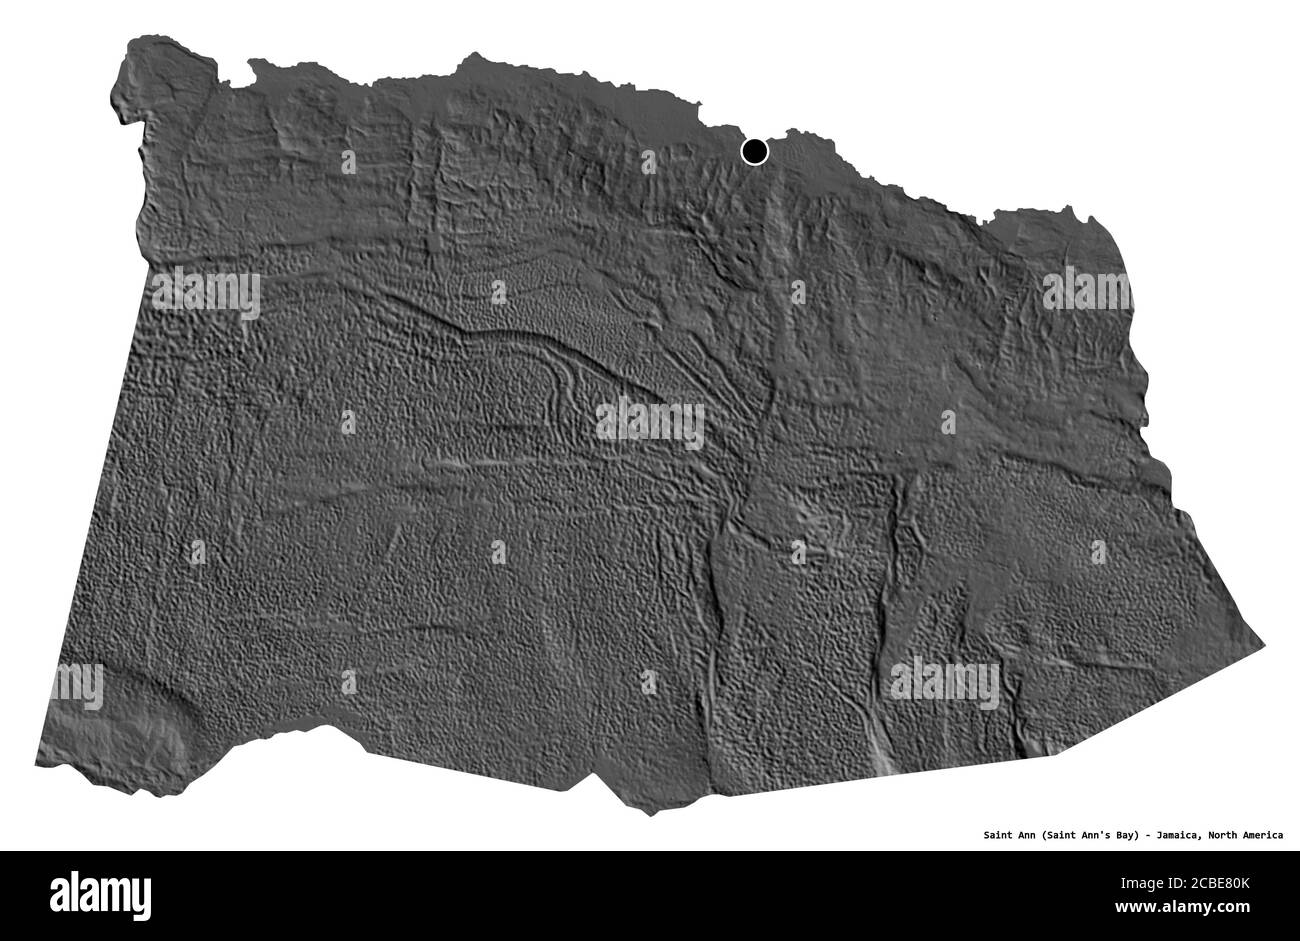 Shape of Saint Ann, parish of Jamaica, with its capital isolated on white background. Bilevel elevation map. 3D rendering Stock Photo